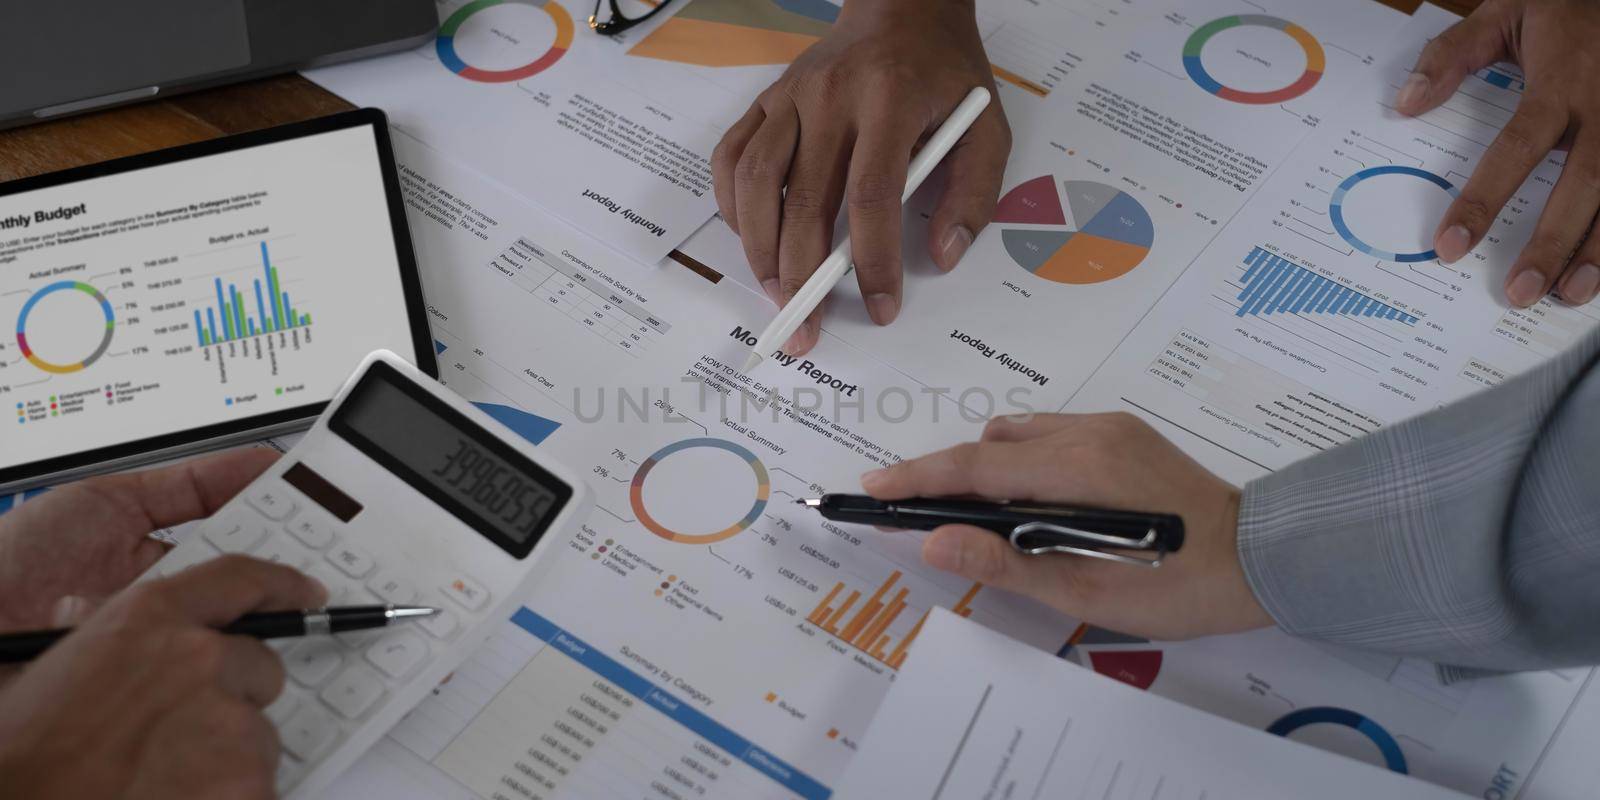 Business People Meeting using laptop computer,calculator,notebook,stock market chart paper for analysis Plans to improve quality next month. Conference Discussion Corporate Concept.